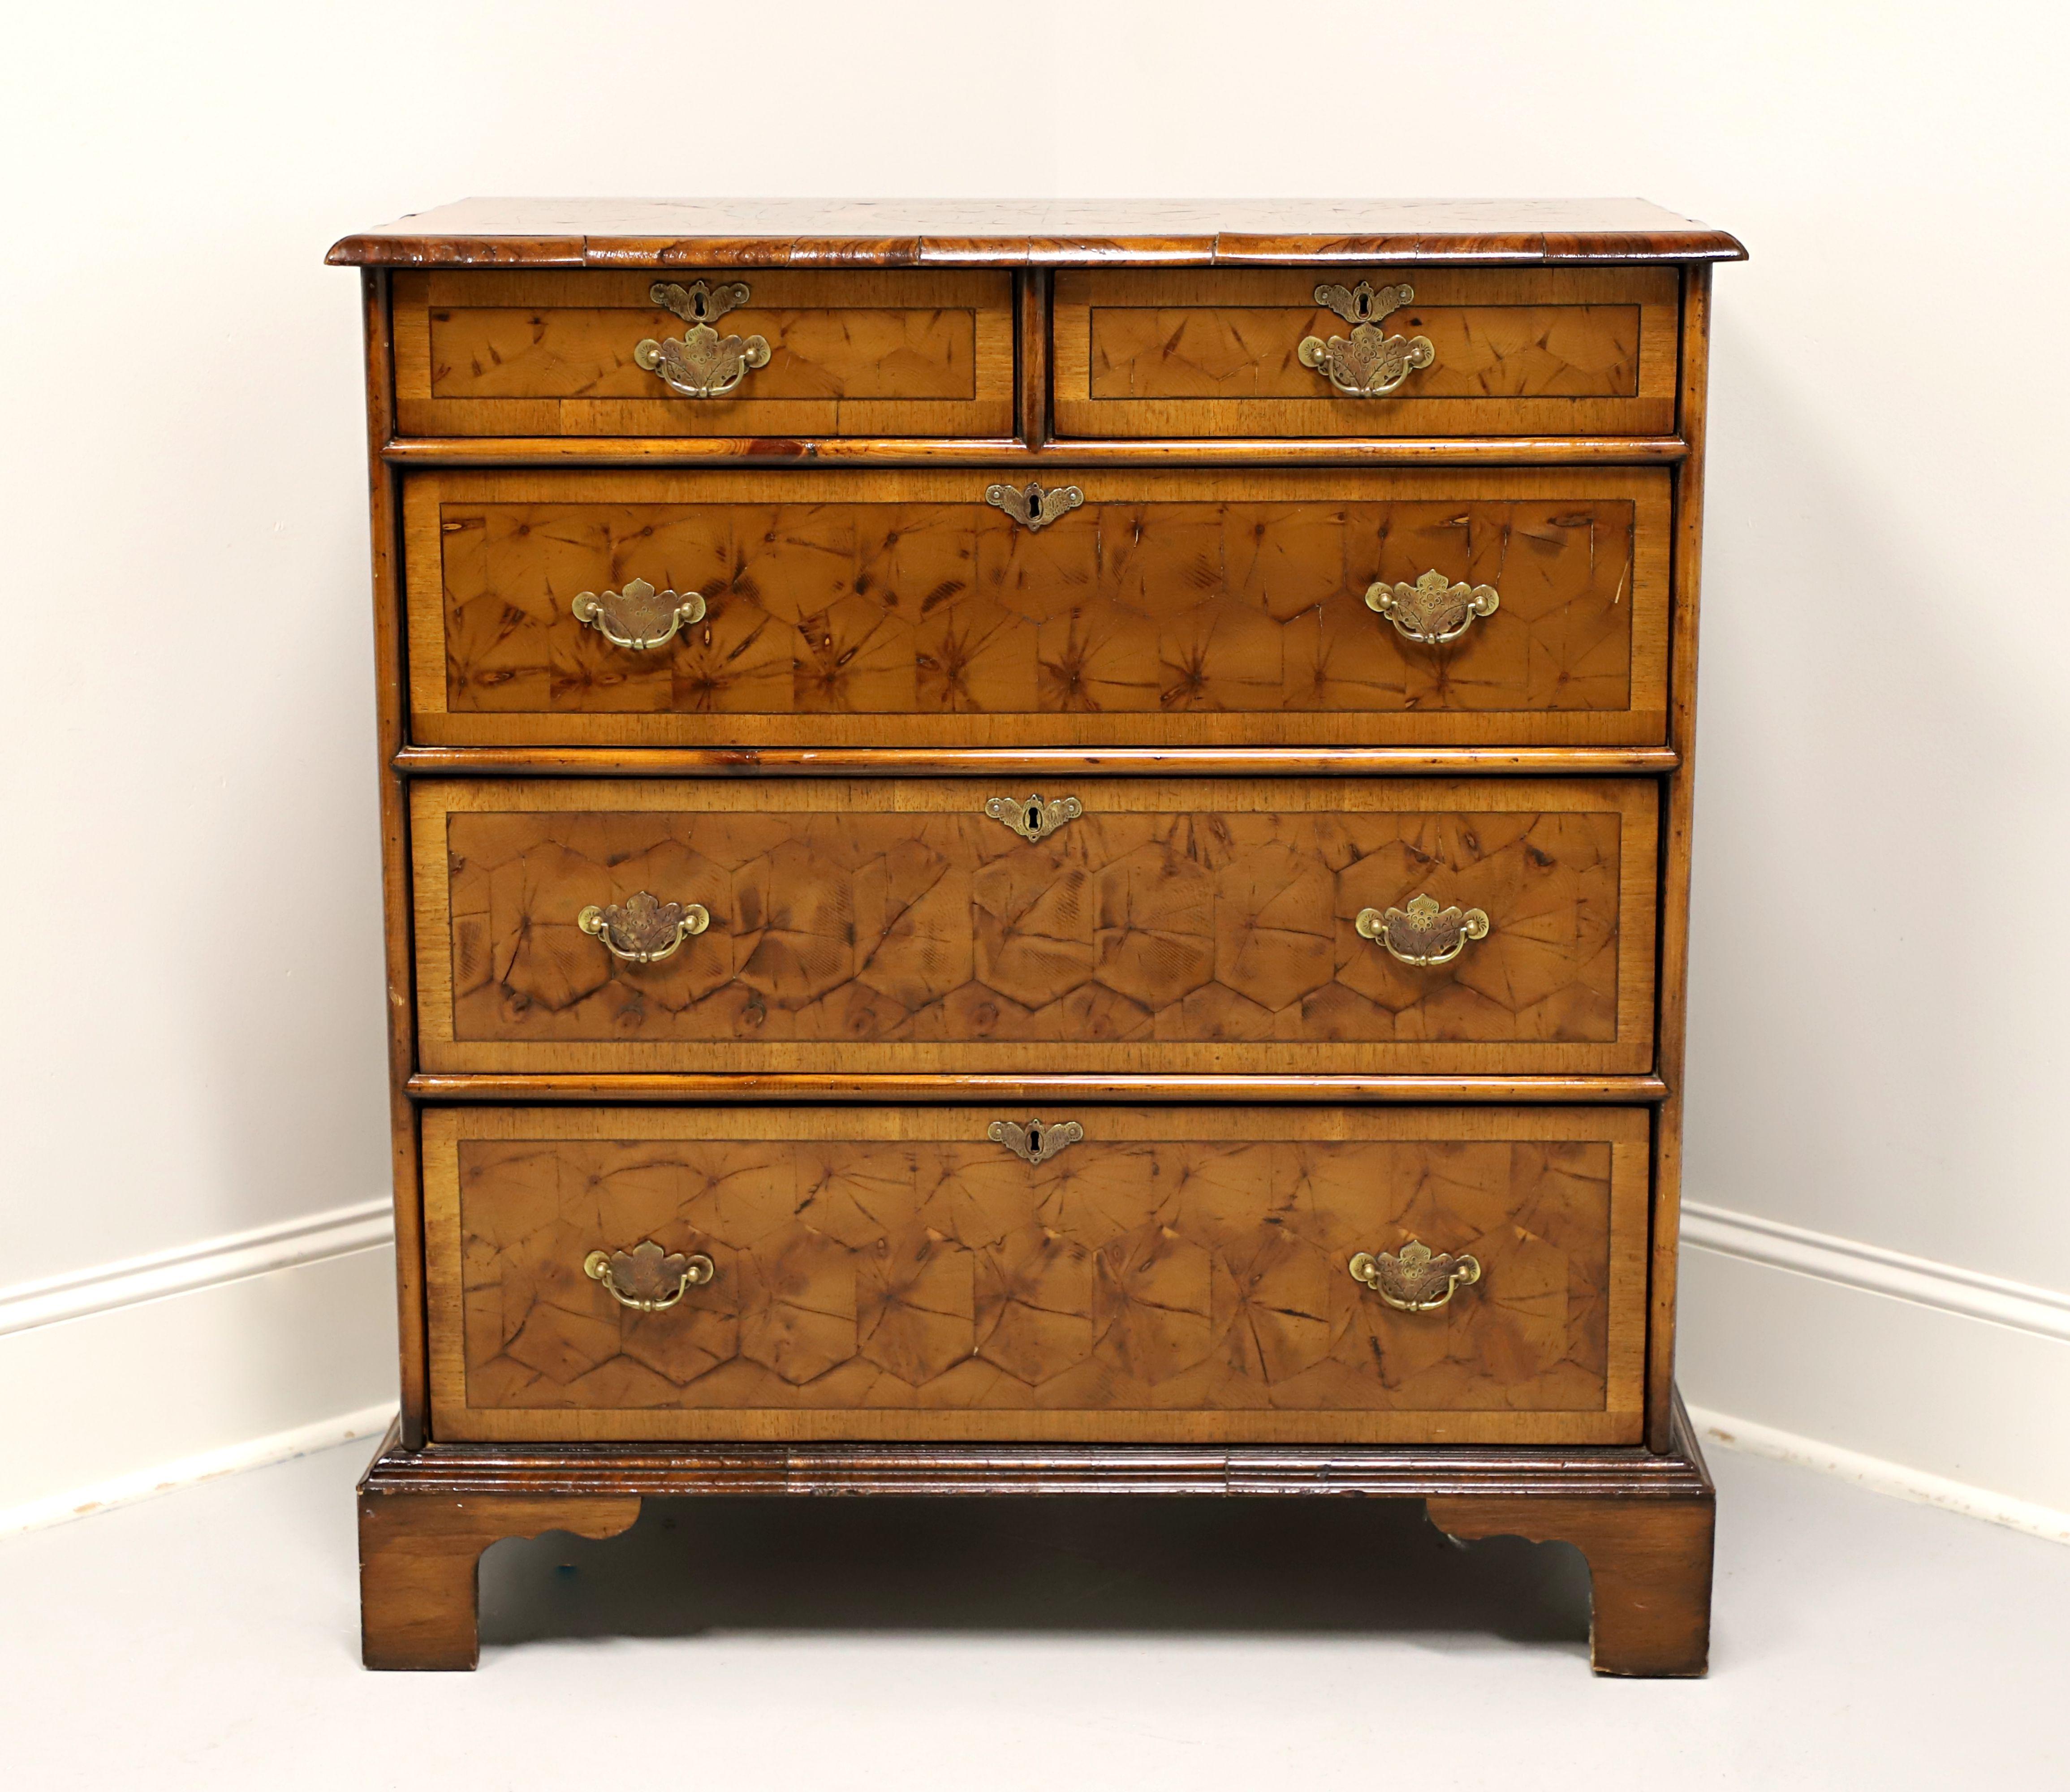 An antique Chippendale style chest of drawers, likely originating in England, in the 19th Century. Oyster veneer of Laburnum wood. Parquetry design to top with oyster bullnose edge, brass hardware, banded drawer fronts, and bracket feet. Features